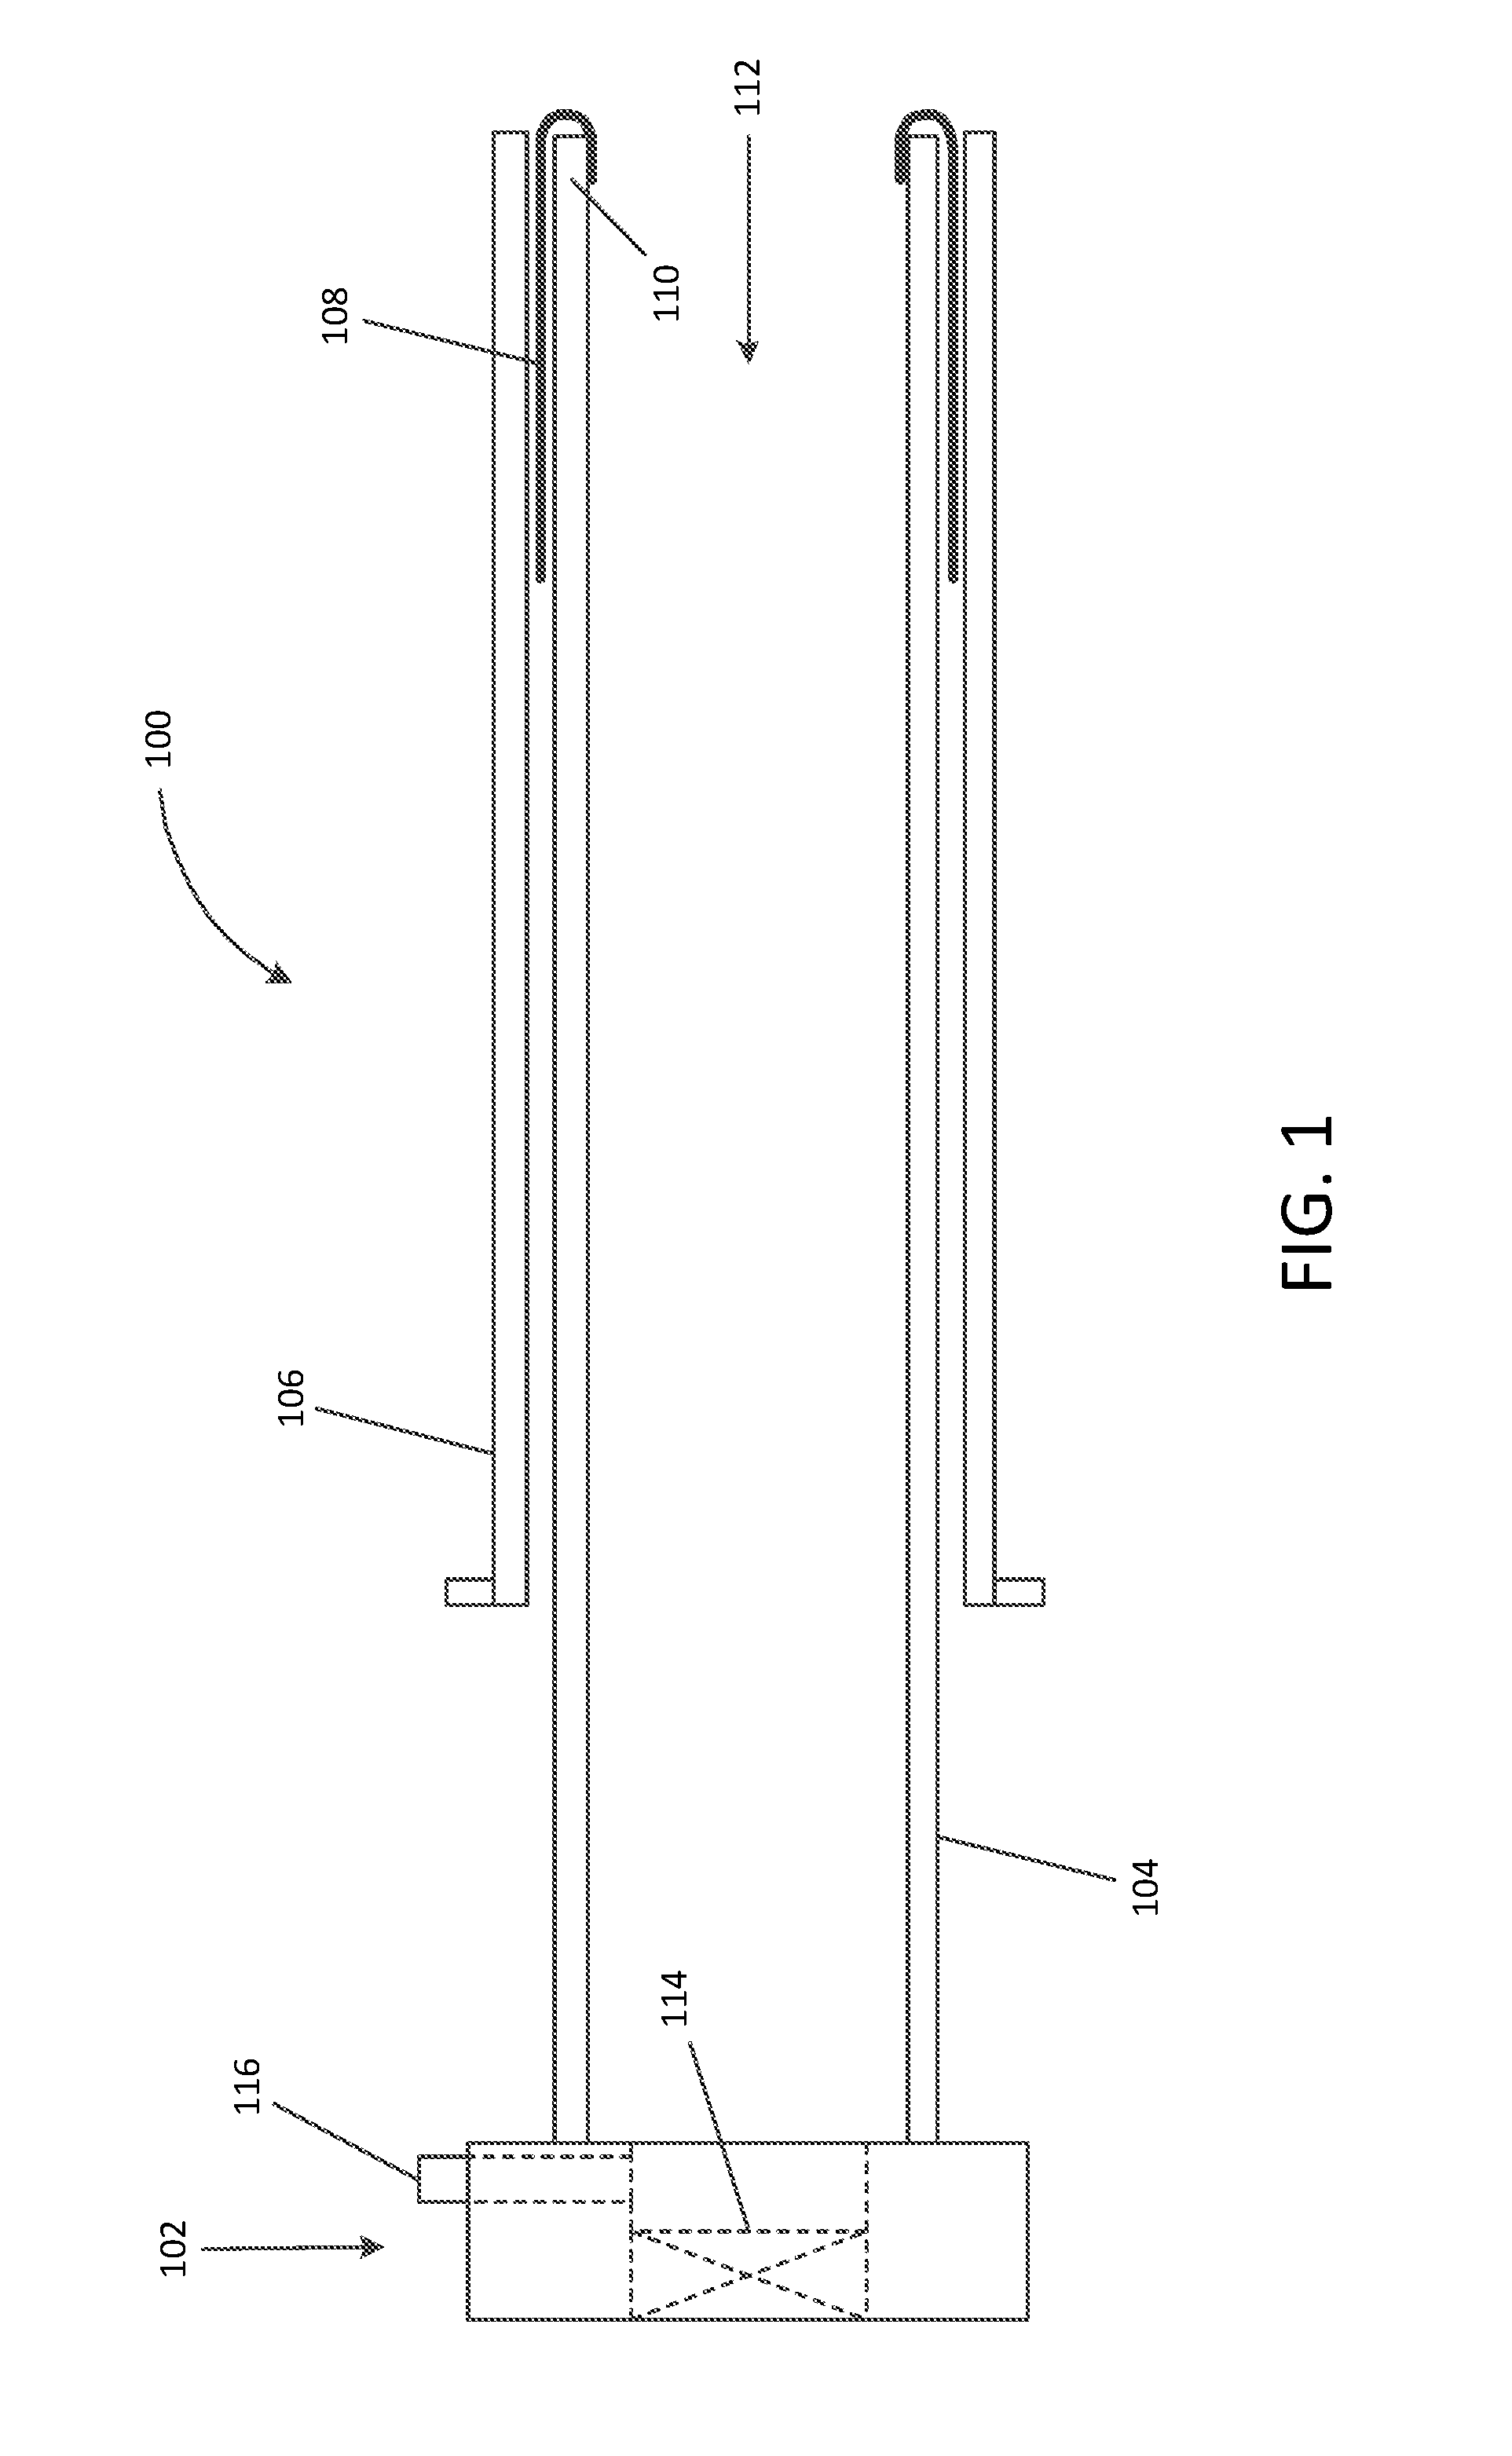 Valve replacement devices and methods